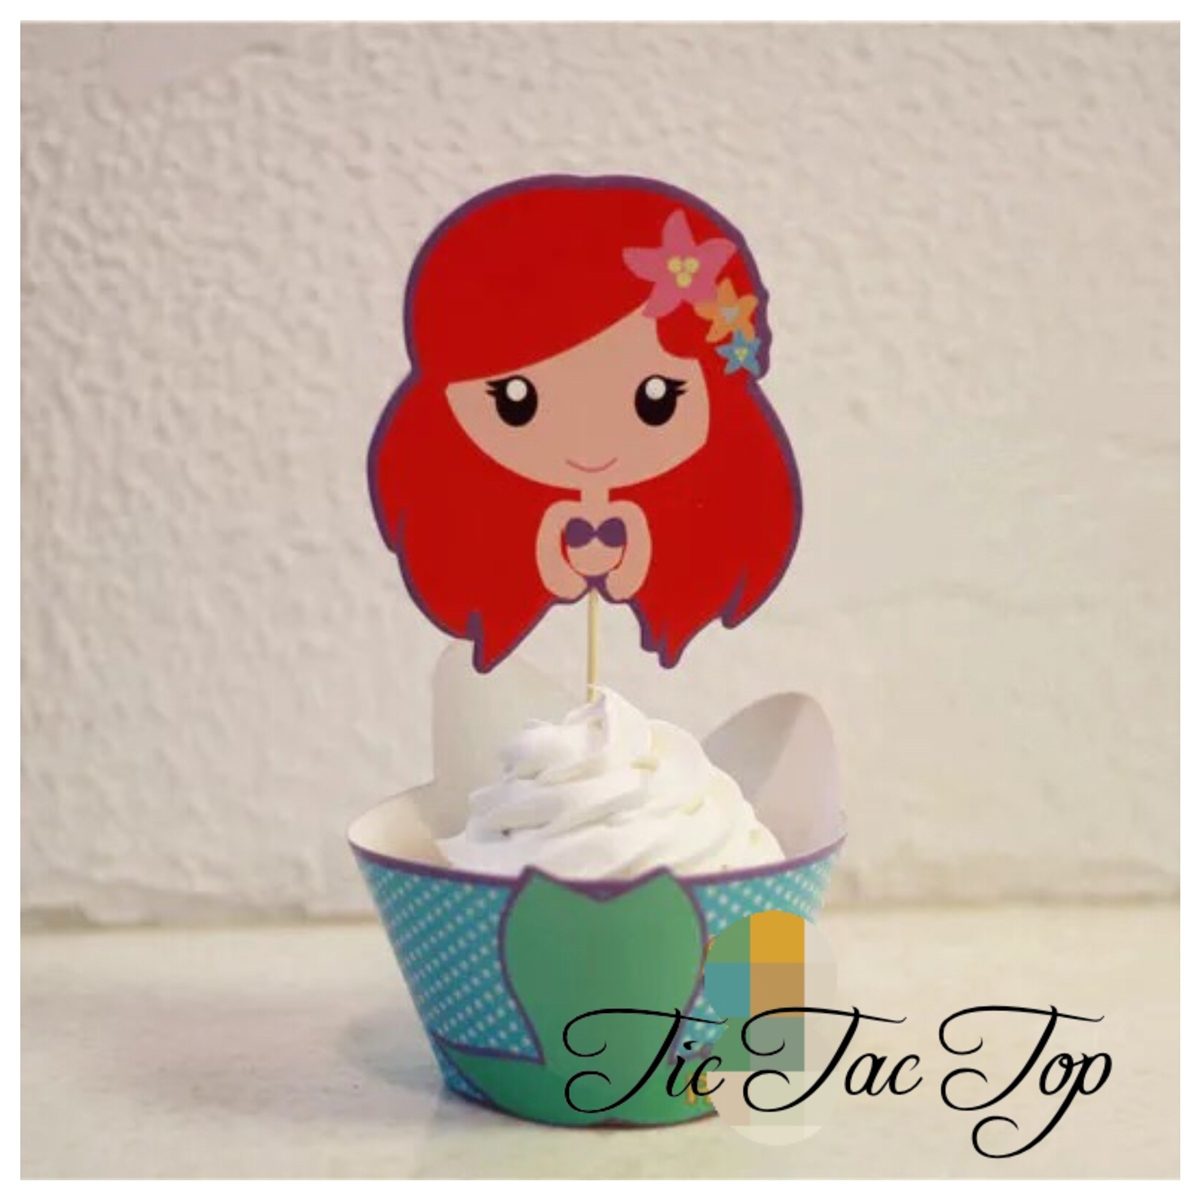 The Little Mermaid SPECIAL EDITION Cupcake Wrappers + Toppers